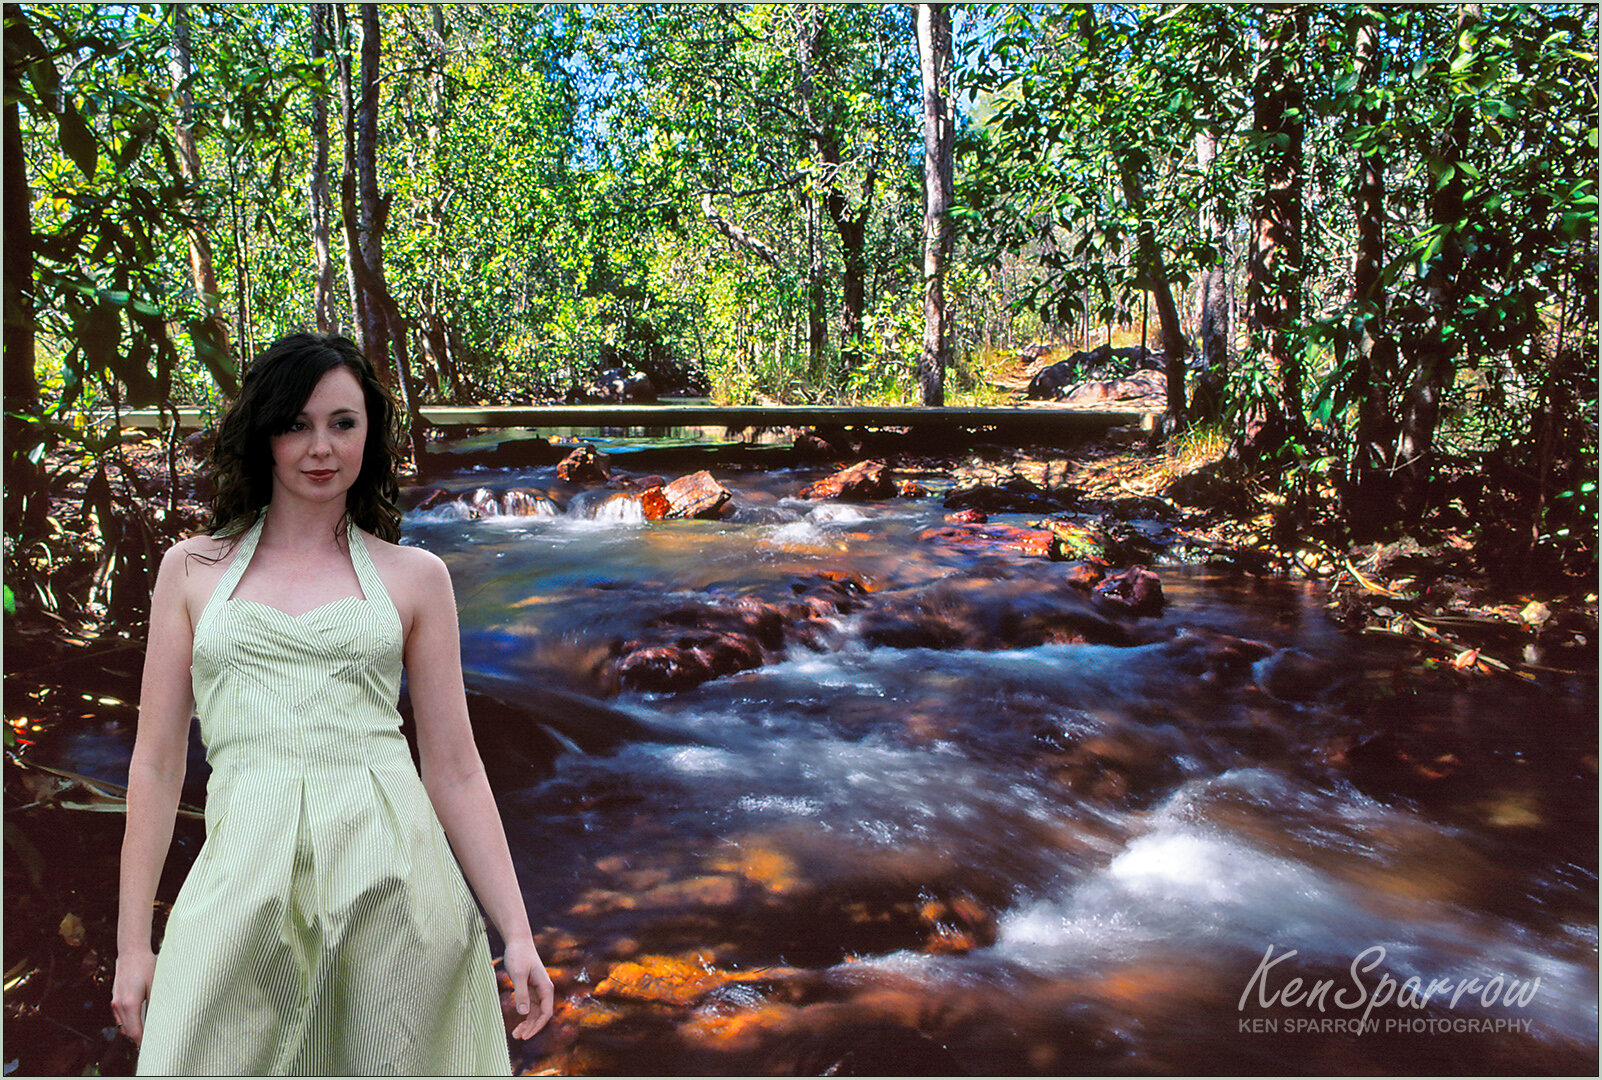 254  Young Model by the River in Litchfield National Park 